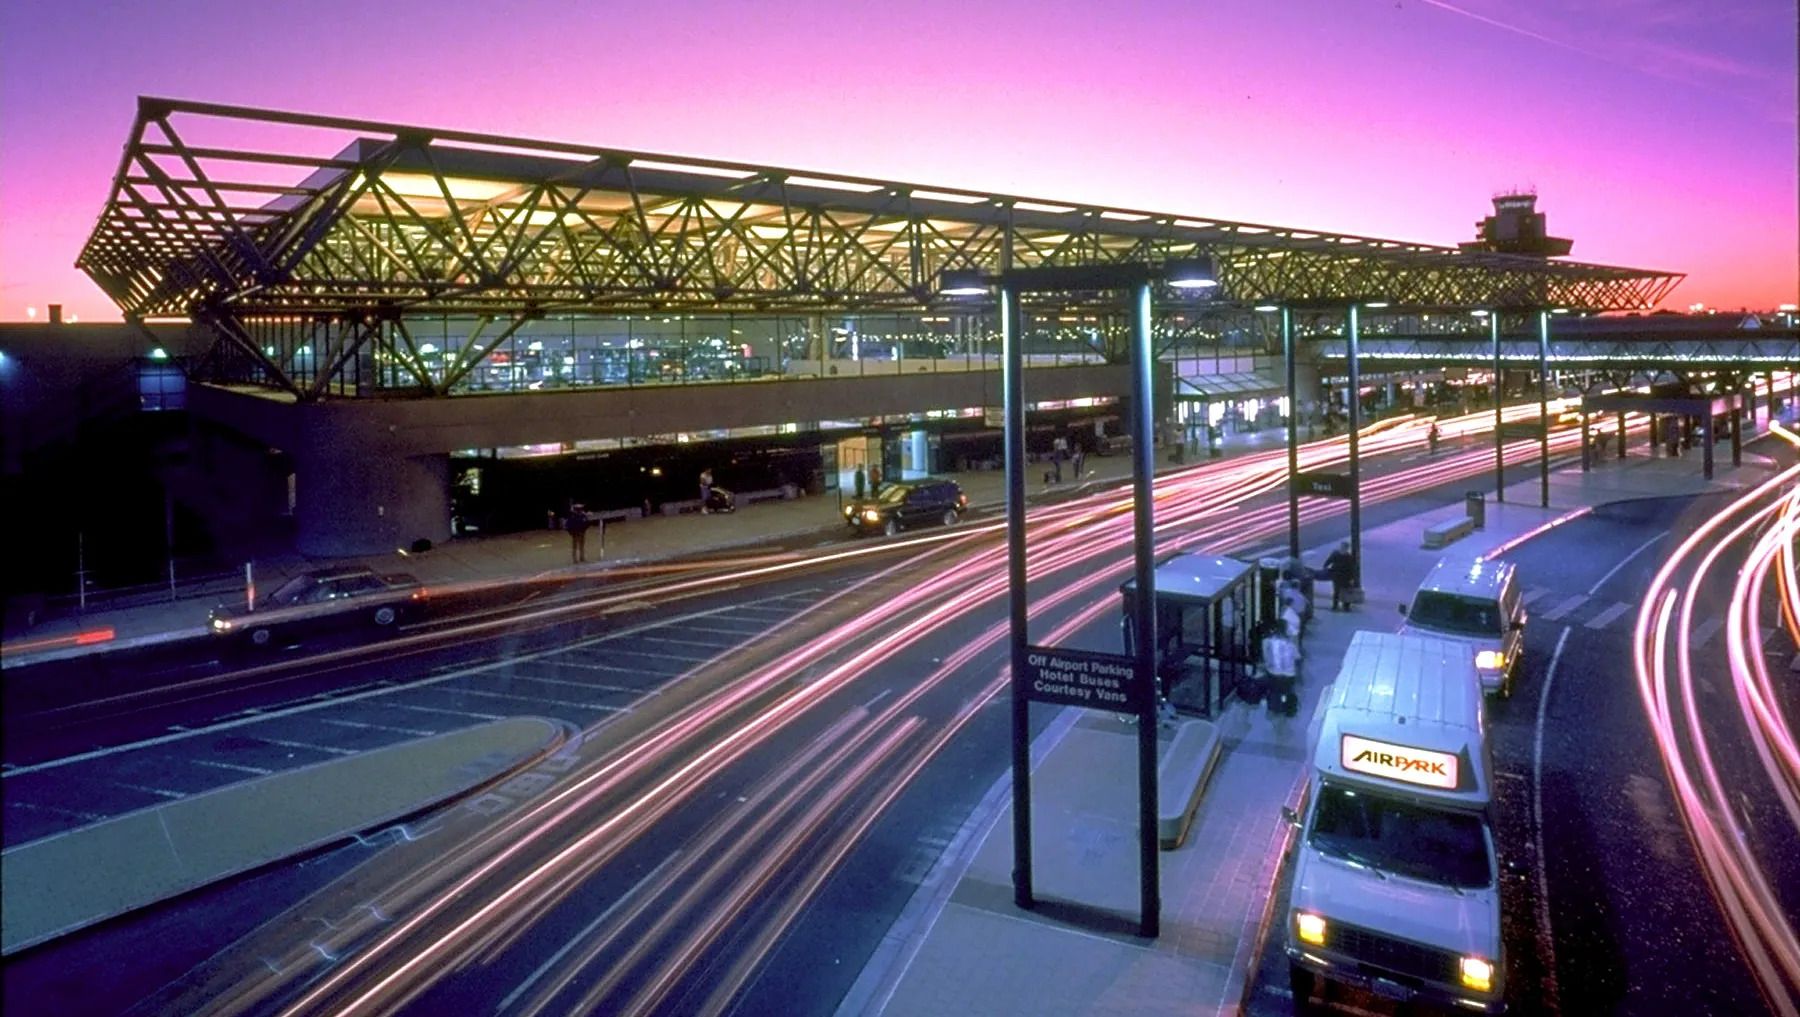 The entrance to the Oakland International Airport in California, USA